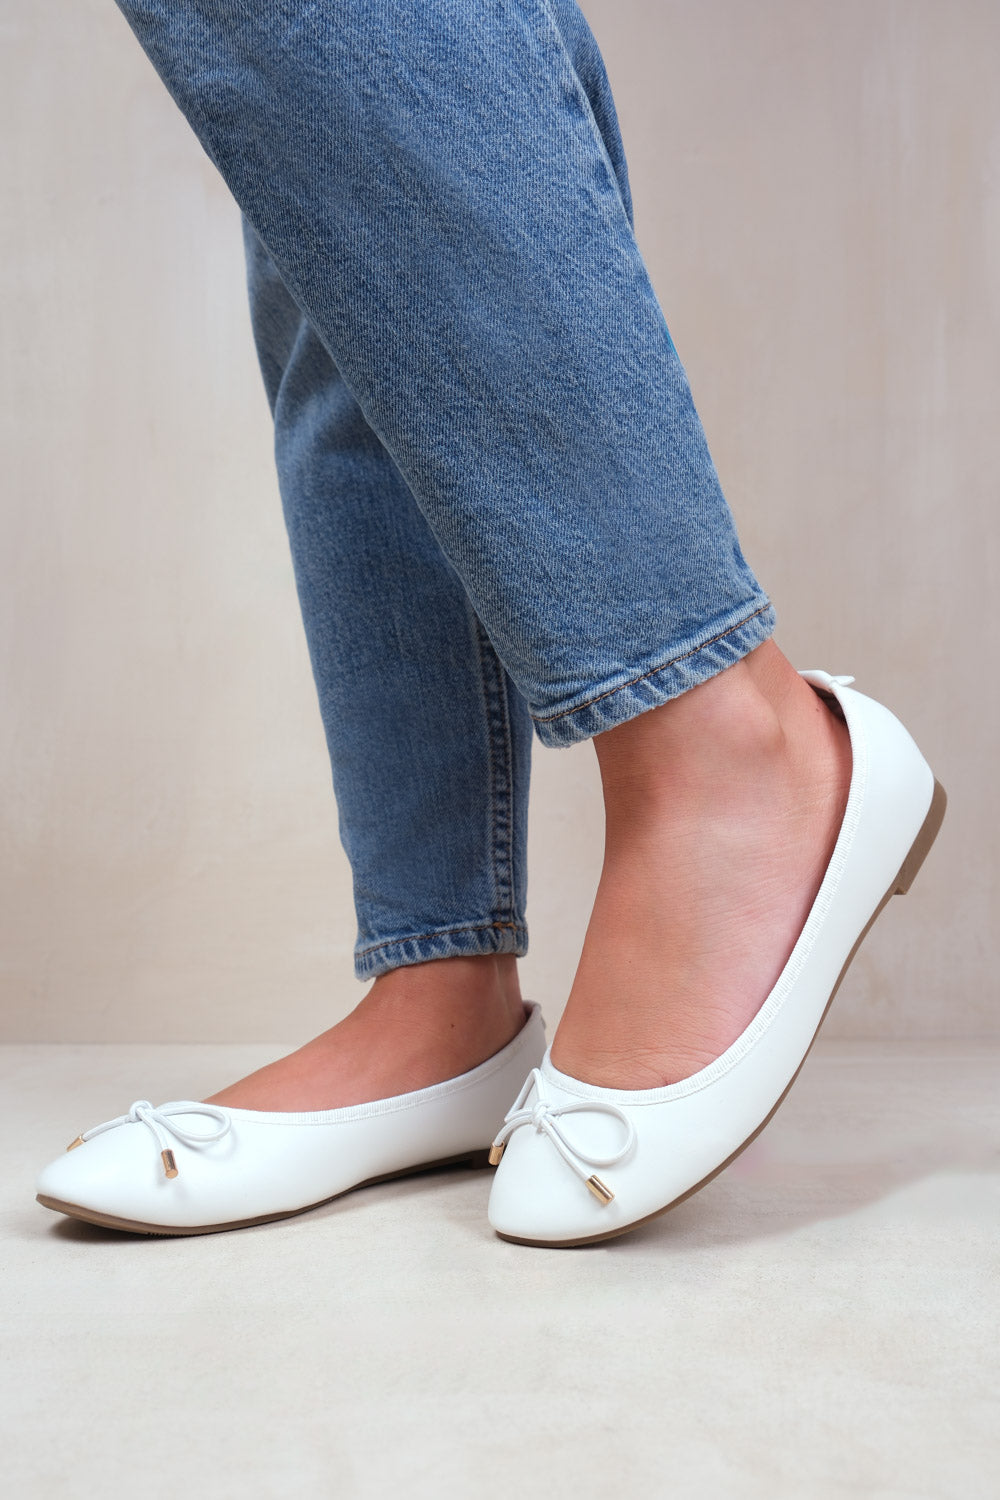 TALLULAH WIDE FIT SLIP ON FLAT PUMPS IN WHITE FAUX LEATHER